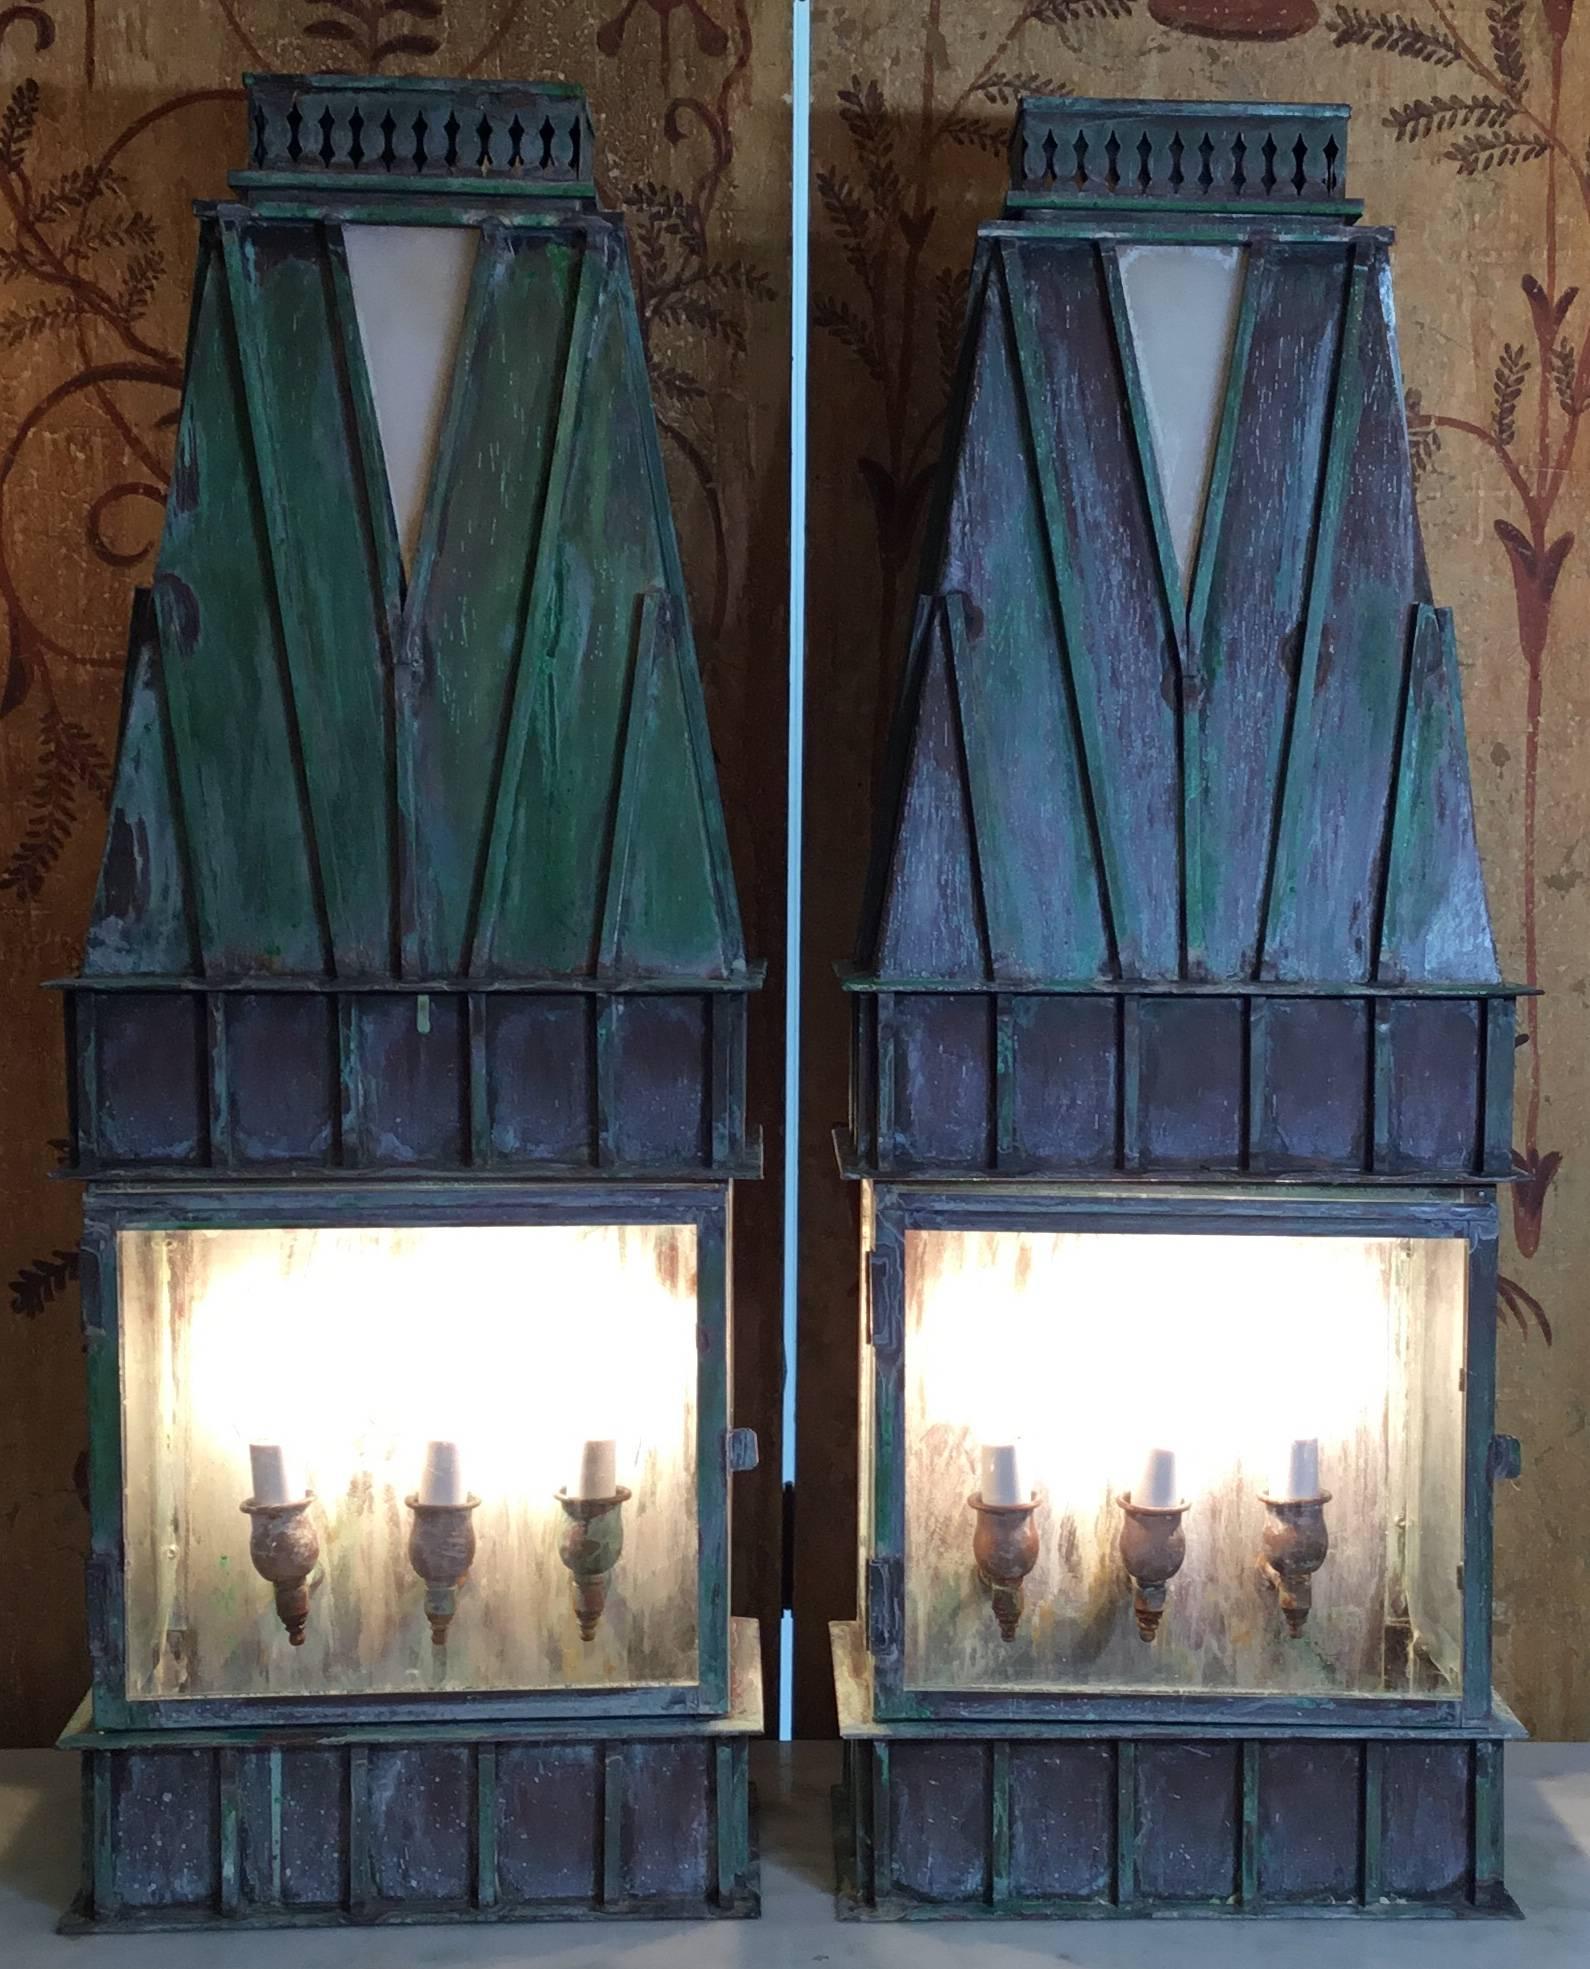 Impressive pair of vintage lanterns made of hand crafted solid brass ,with three 60/watt light each lantern, electrified and ready to use.
Suitable for wet locations.